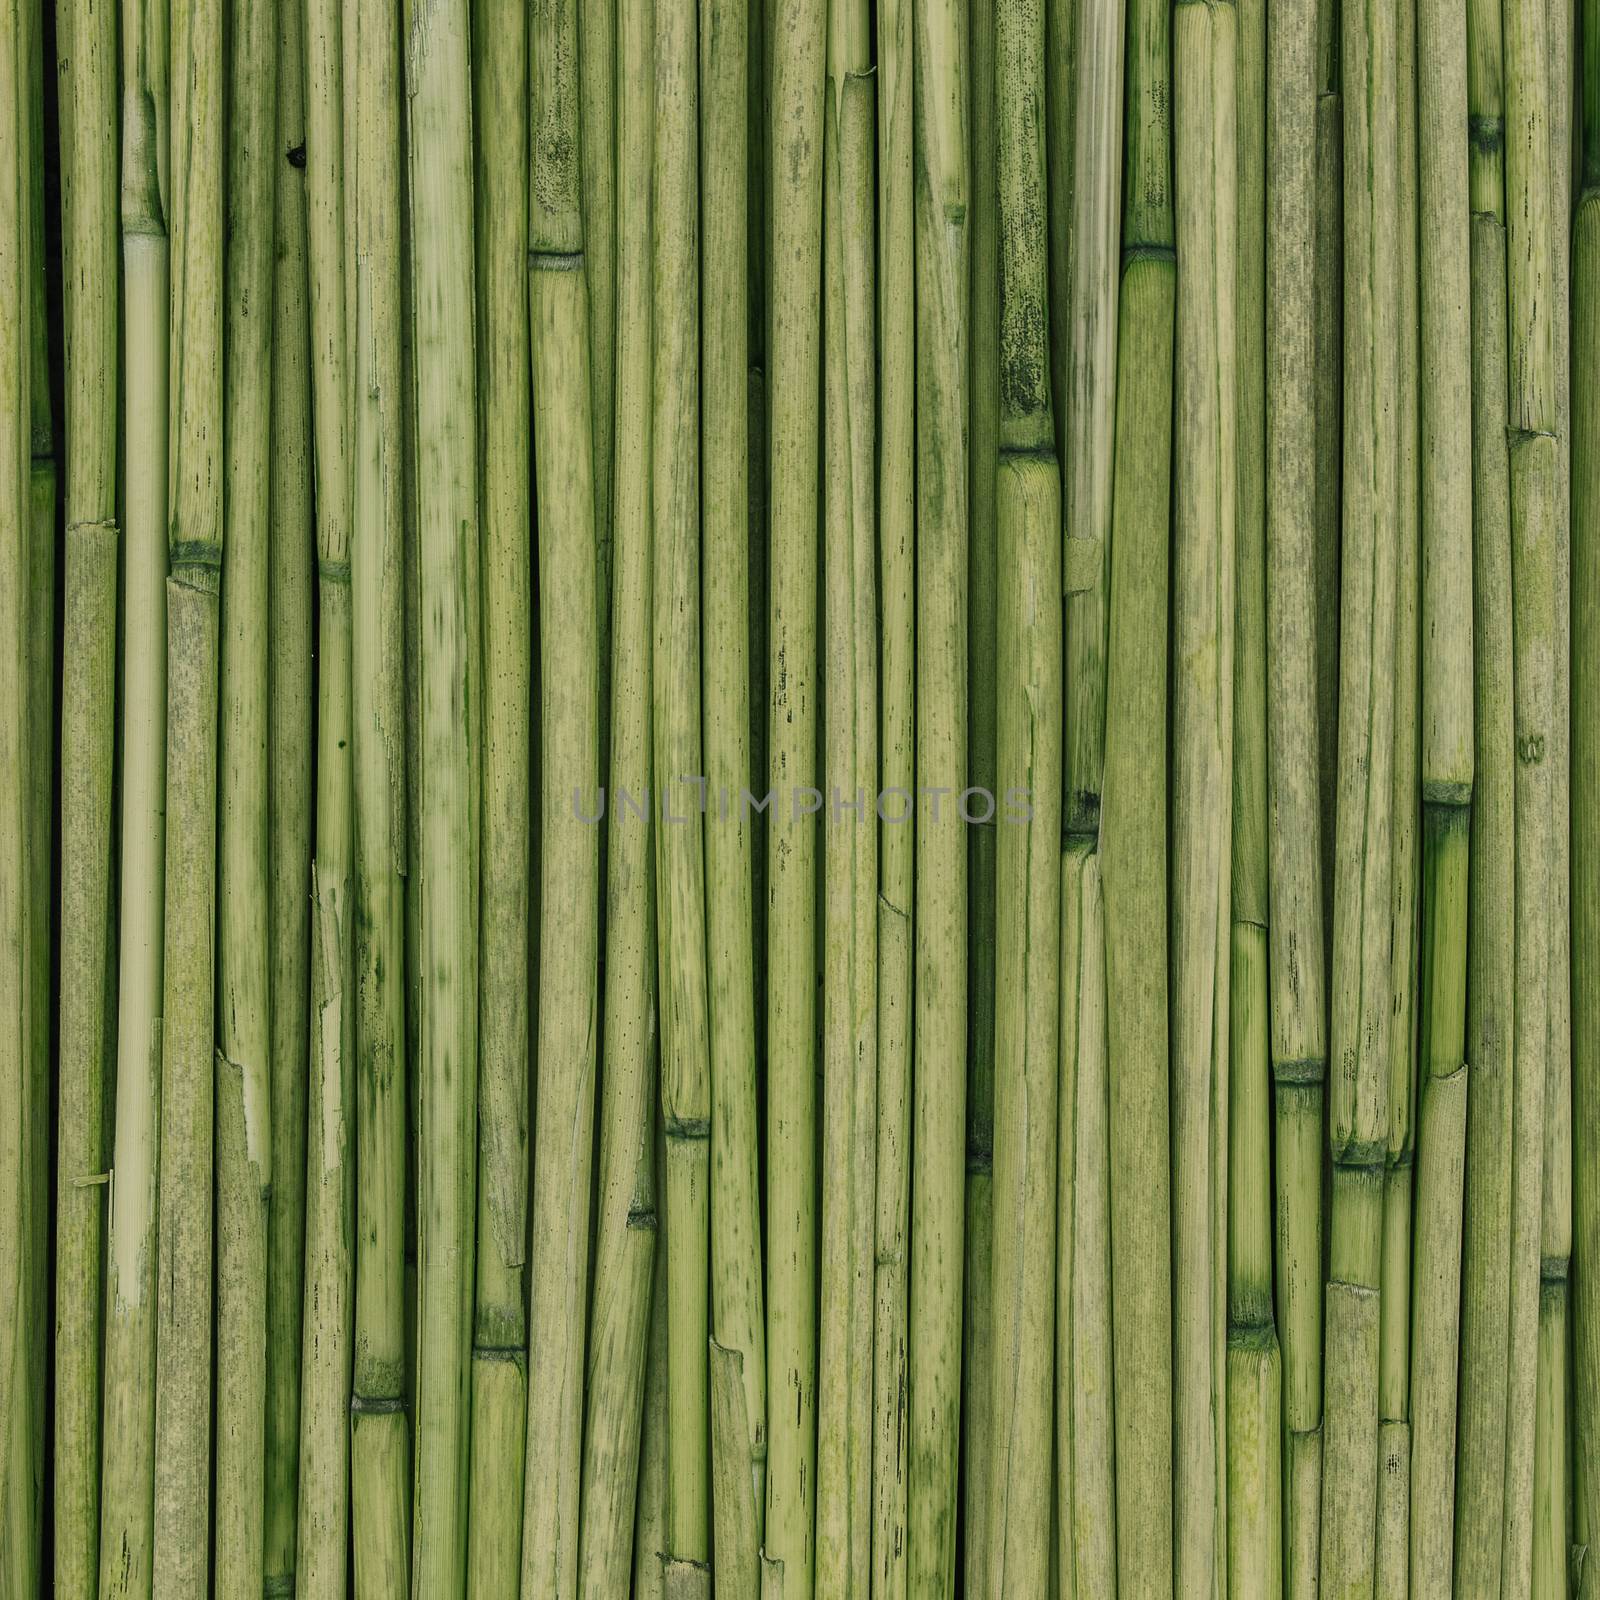 Green Texture of reeds or bamboo for background